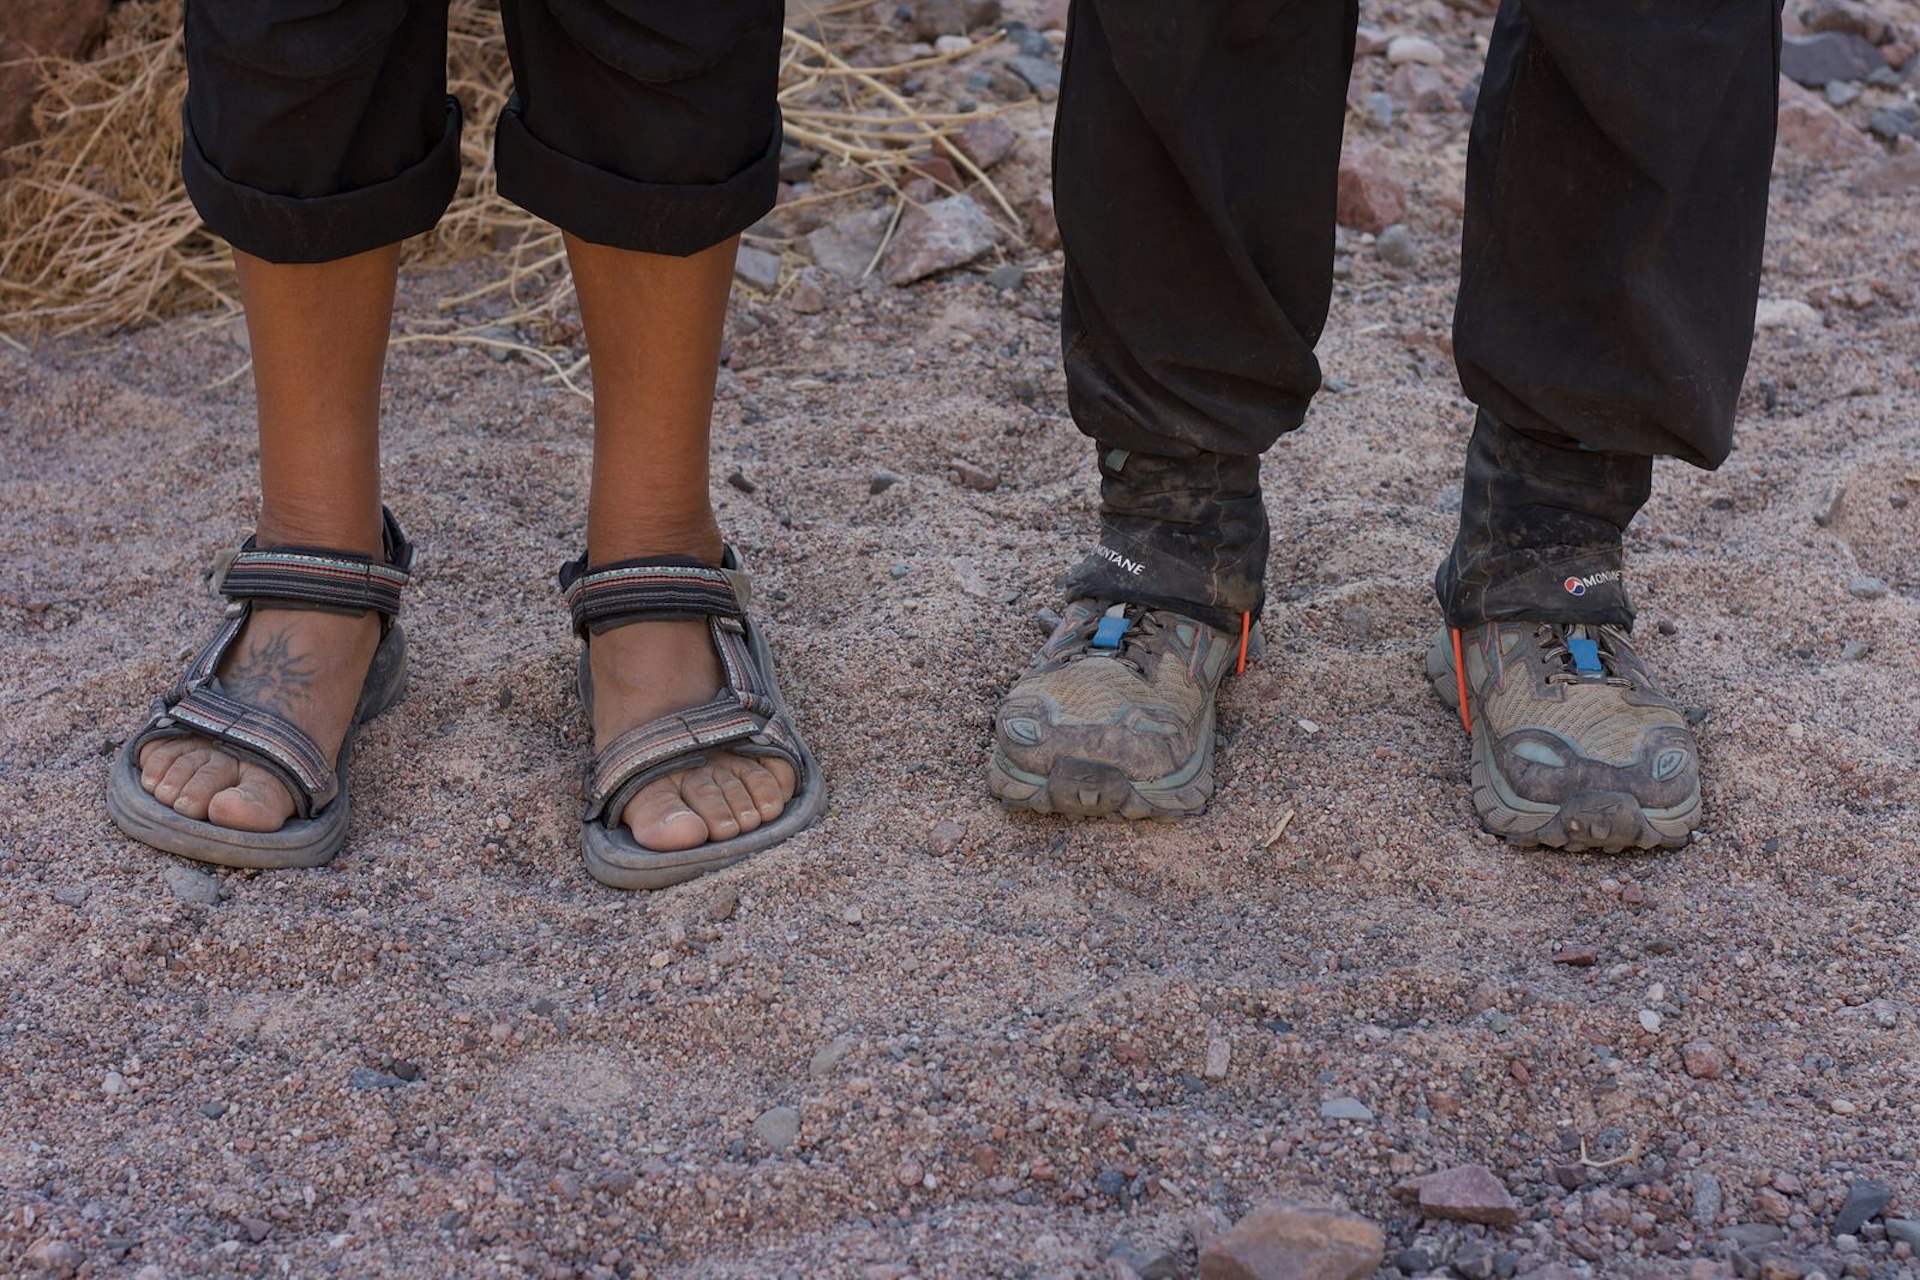 A Bedouin guide - clad in a pair of well-worn sandals - stands next to a hiker in padded hiking boots © Jen Rose Smith / Lonely Planet